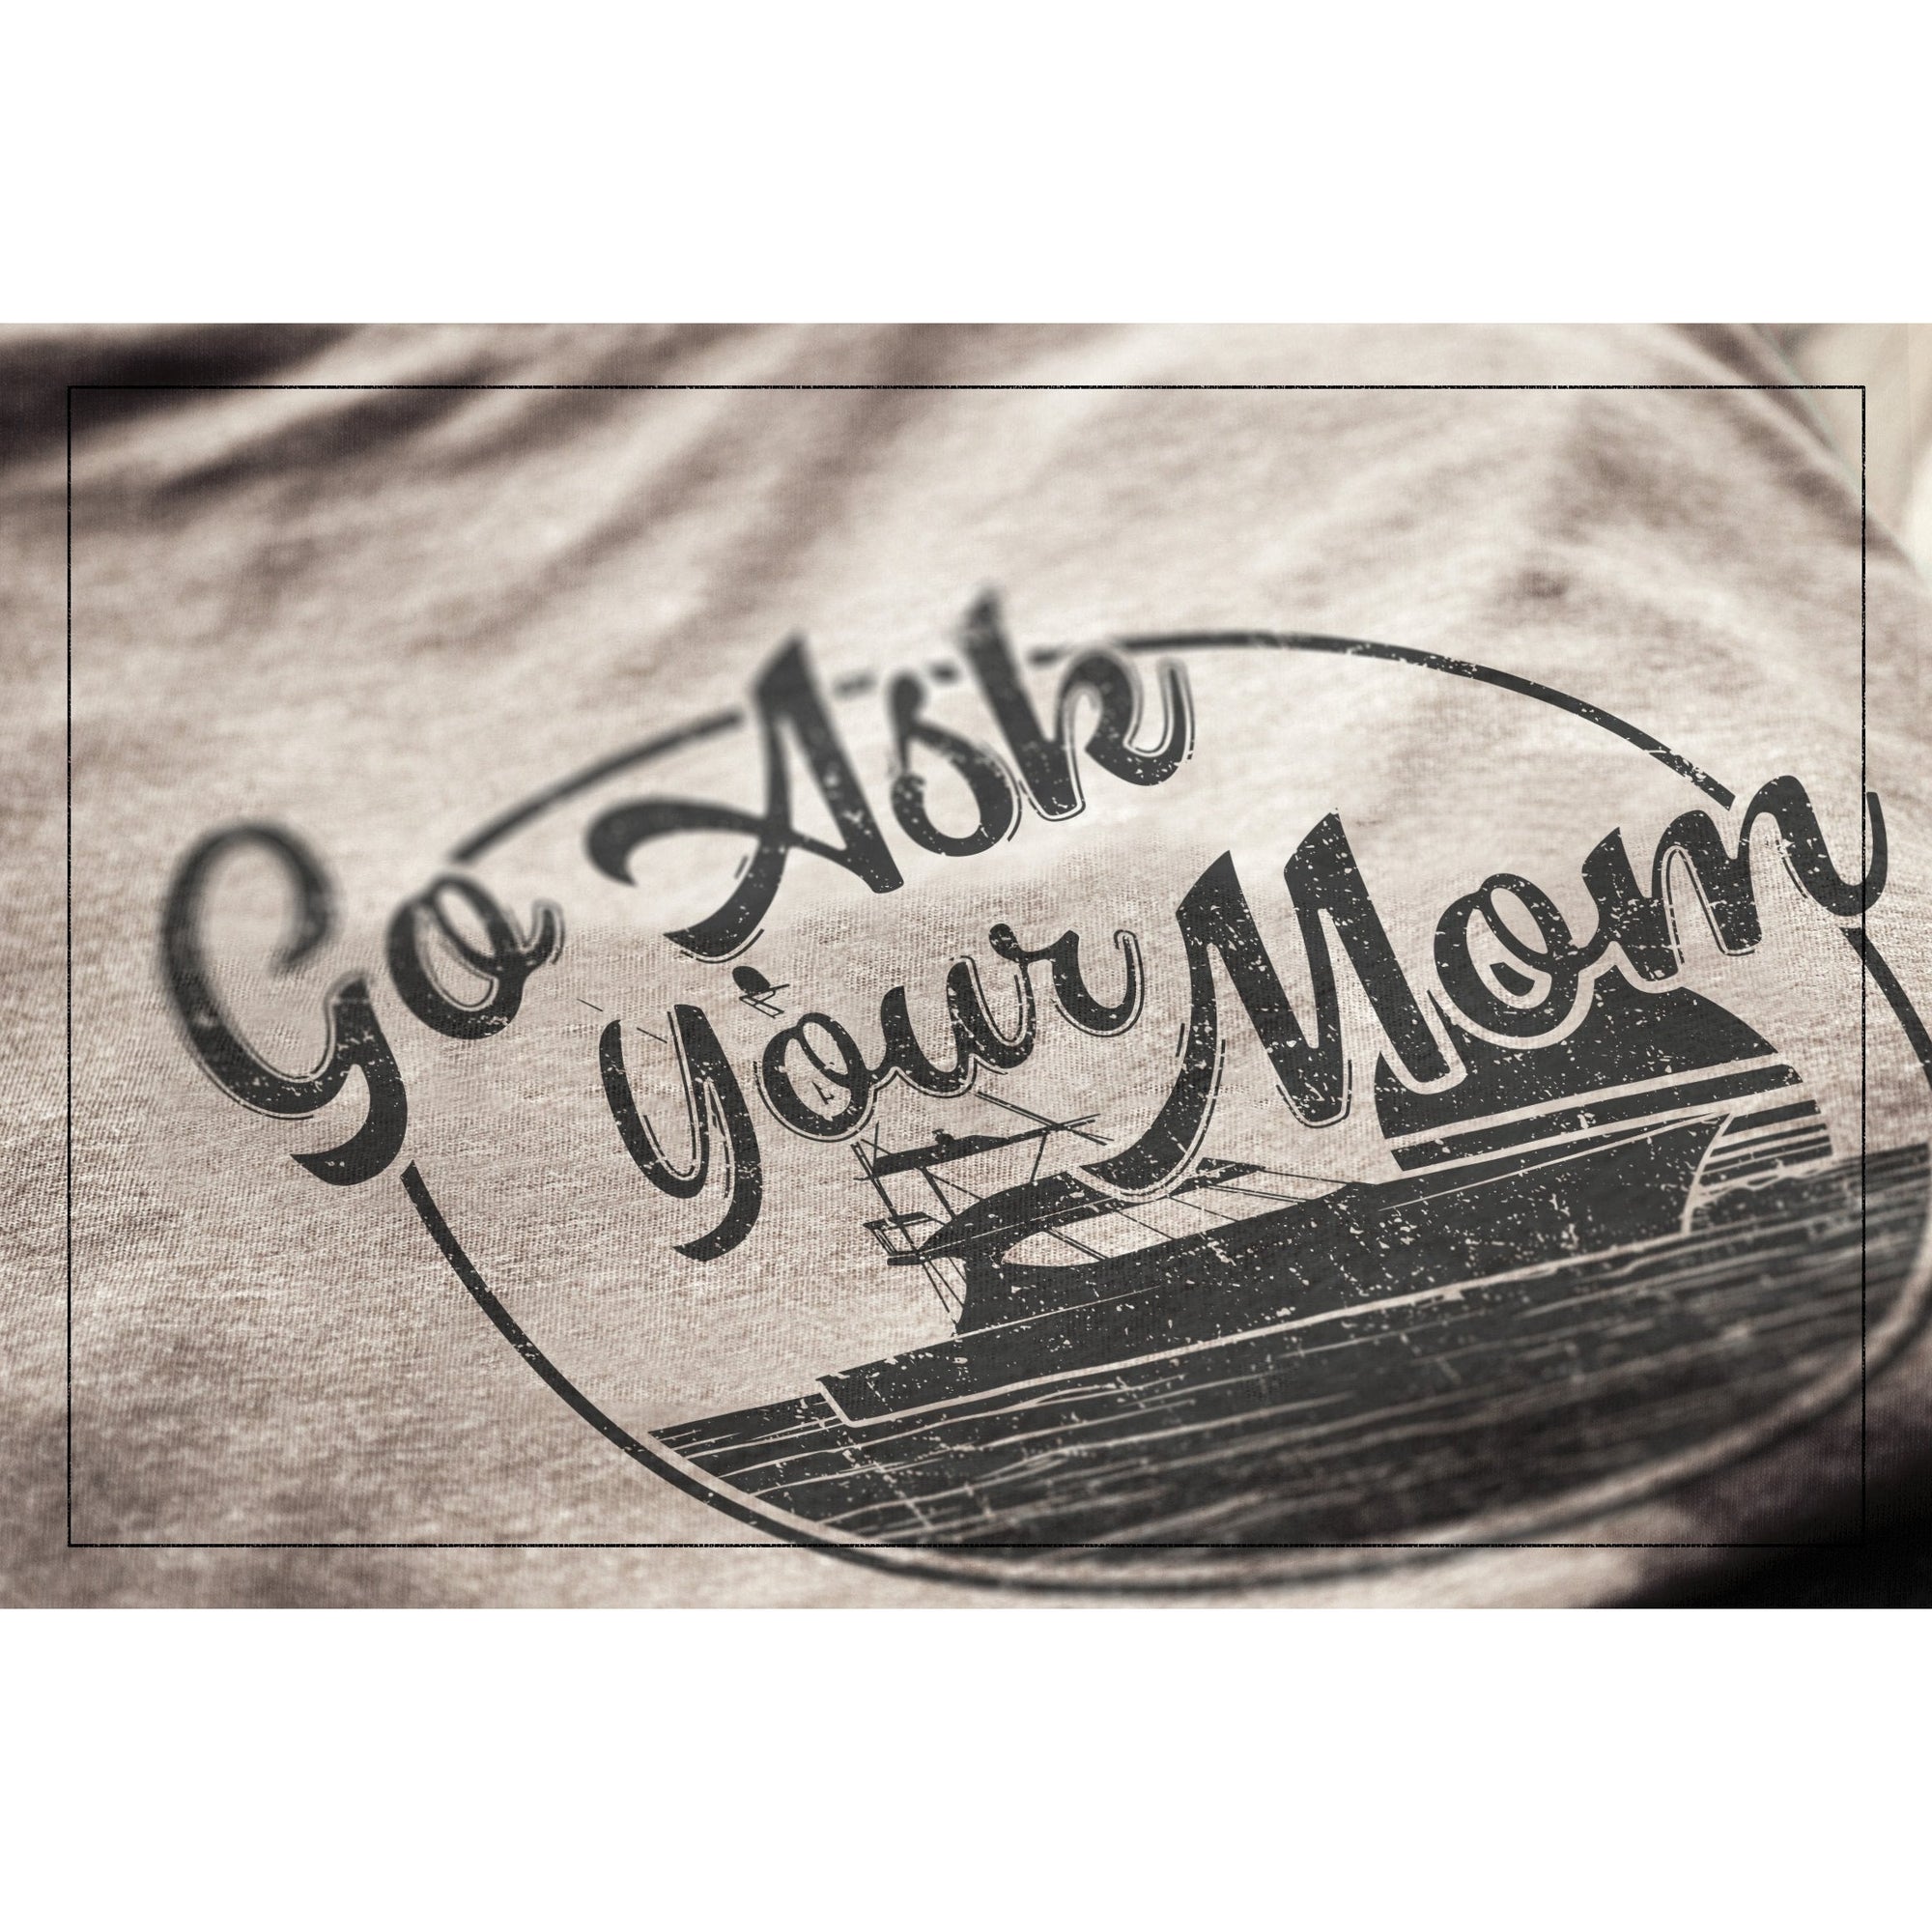 Go Ask Your Mom Military Grey Printed Graphic Men's Crew T-Shirt Tee Closeup Details